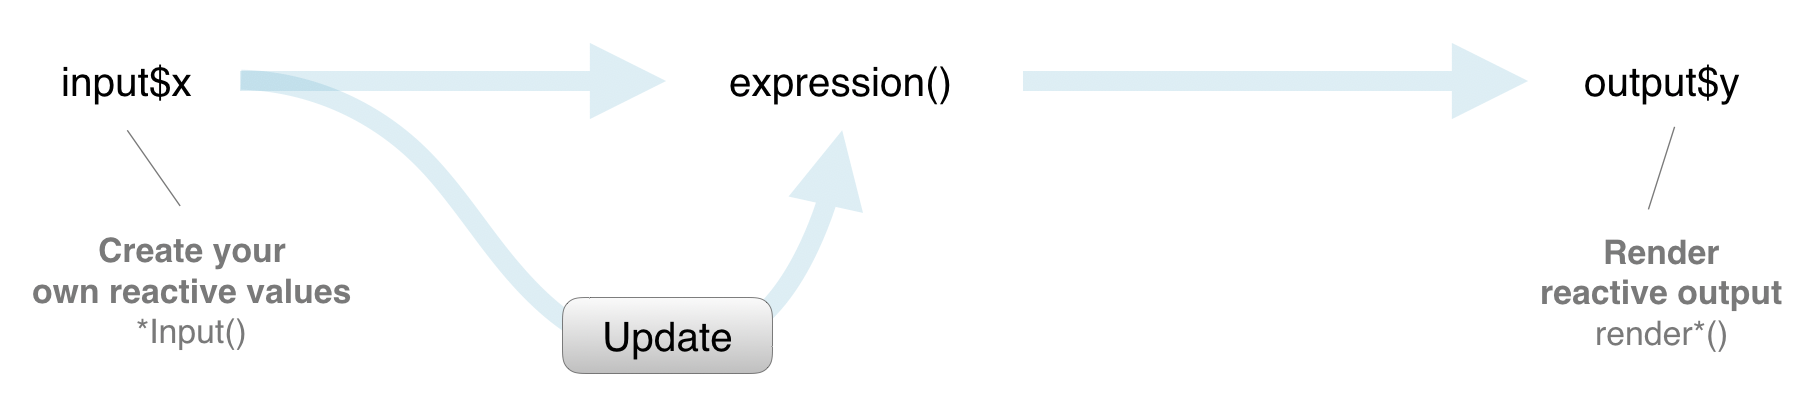 Arrows showing the flow of information from input to output in a Shiny app. 'input$x' creates your own reactive values. That goes to the Update button that goes to 'expression()'. 'expression()' goes to 'output$y' which renders the reactive output.